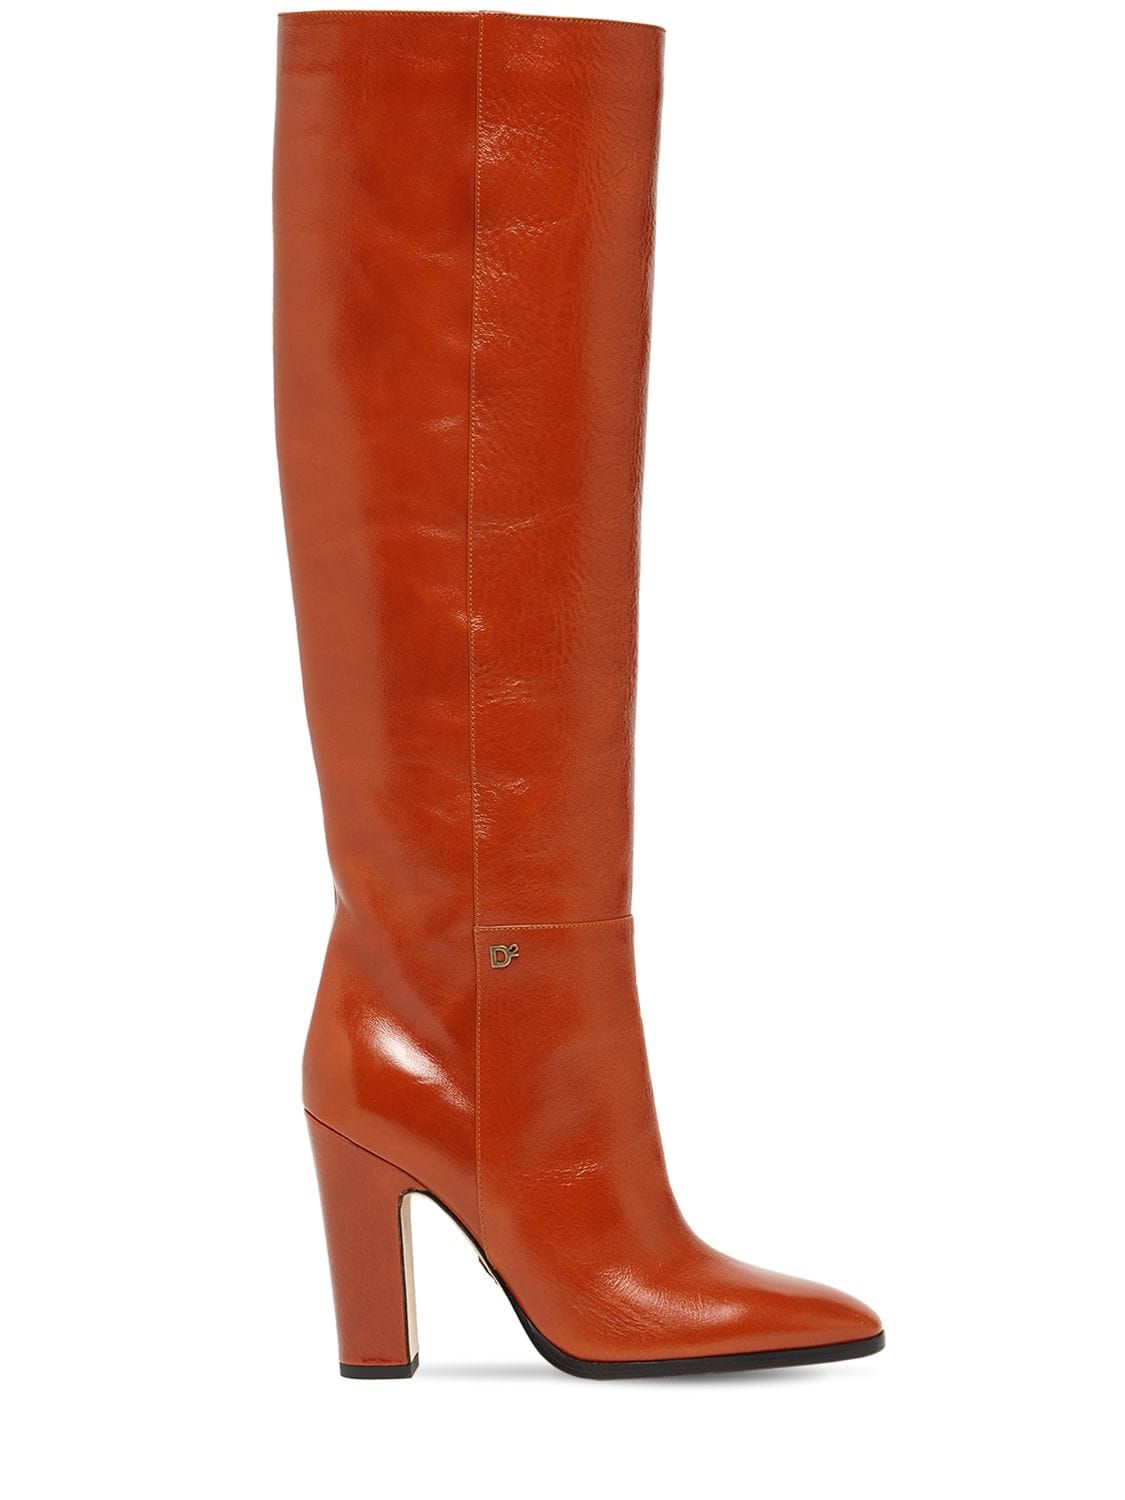 100mm Polished Leather Tall Boots